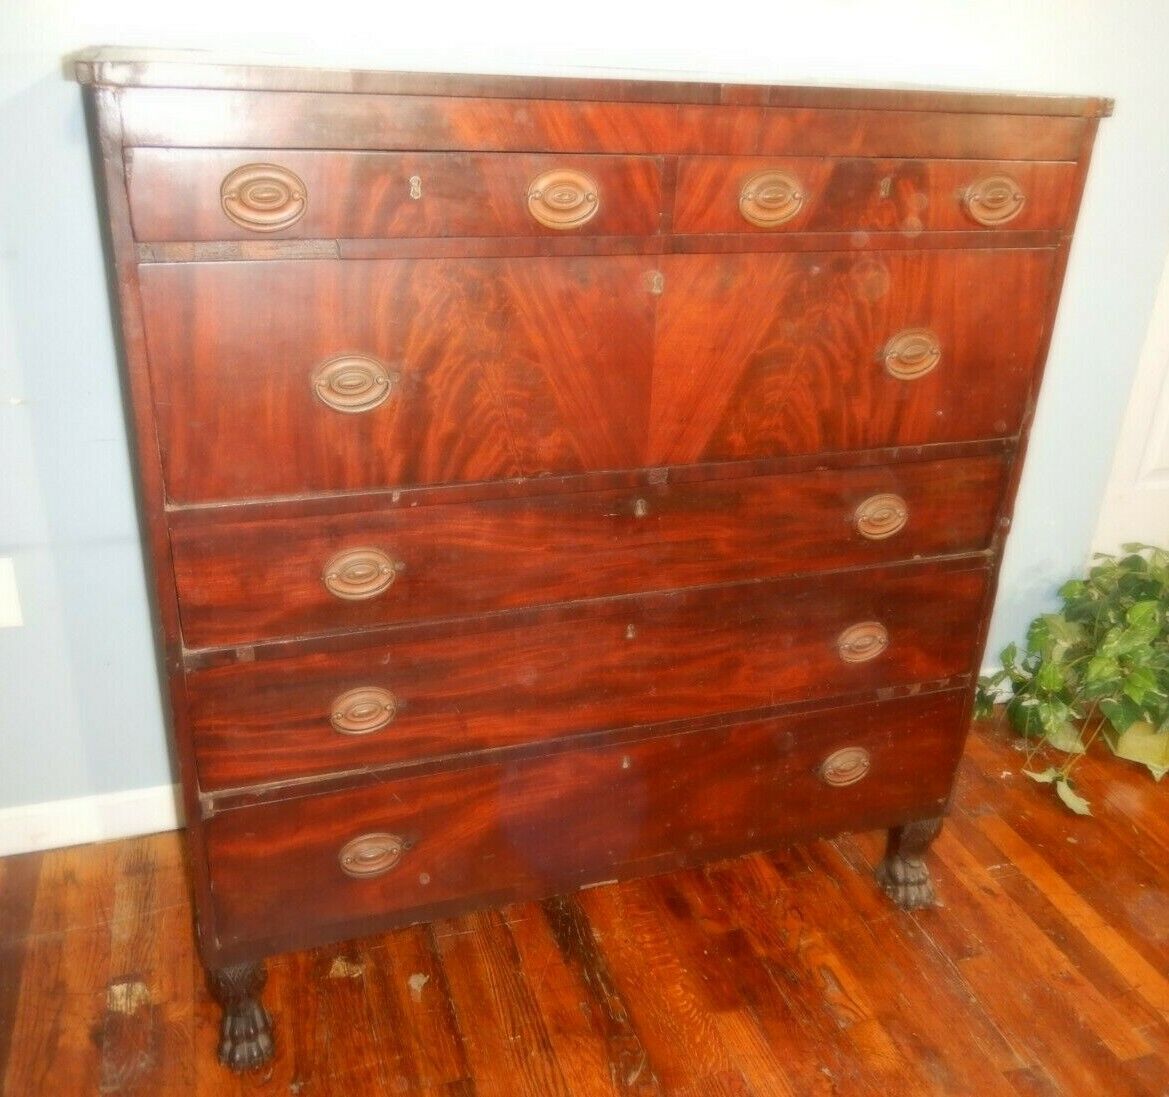 Antique Federal 6 Drawer Chest Mahogany flame fronts Dresser as found